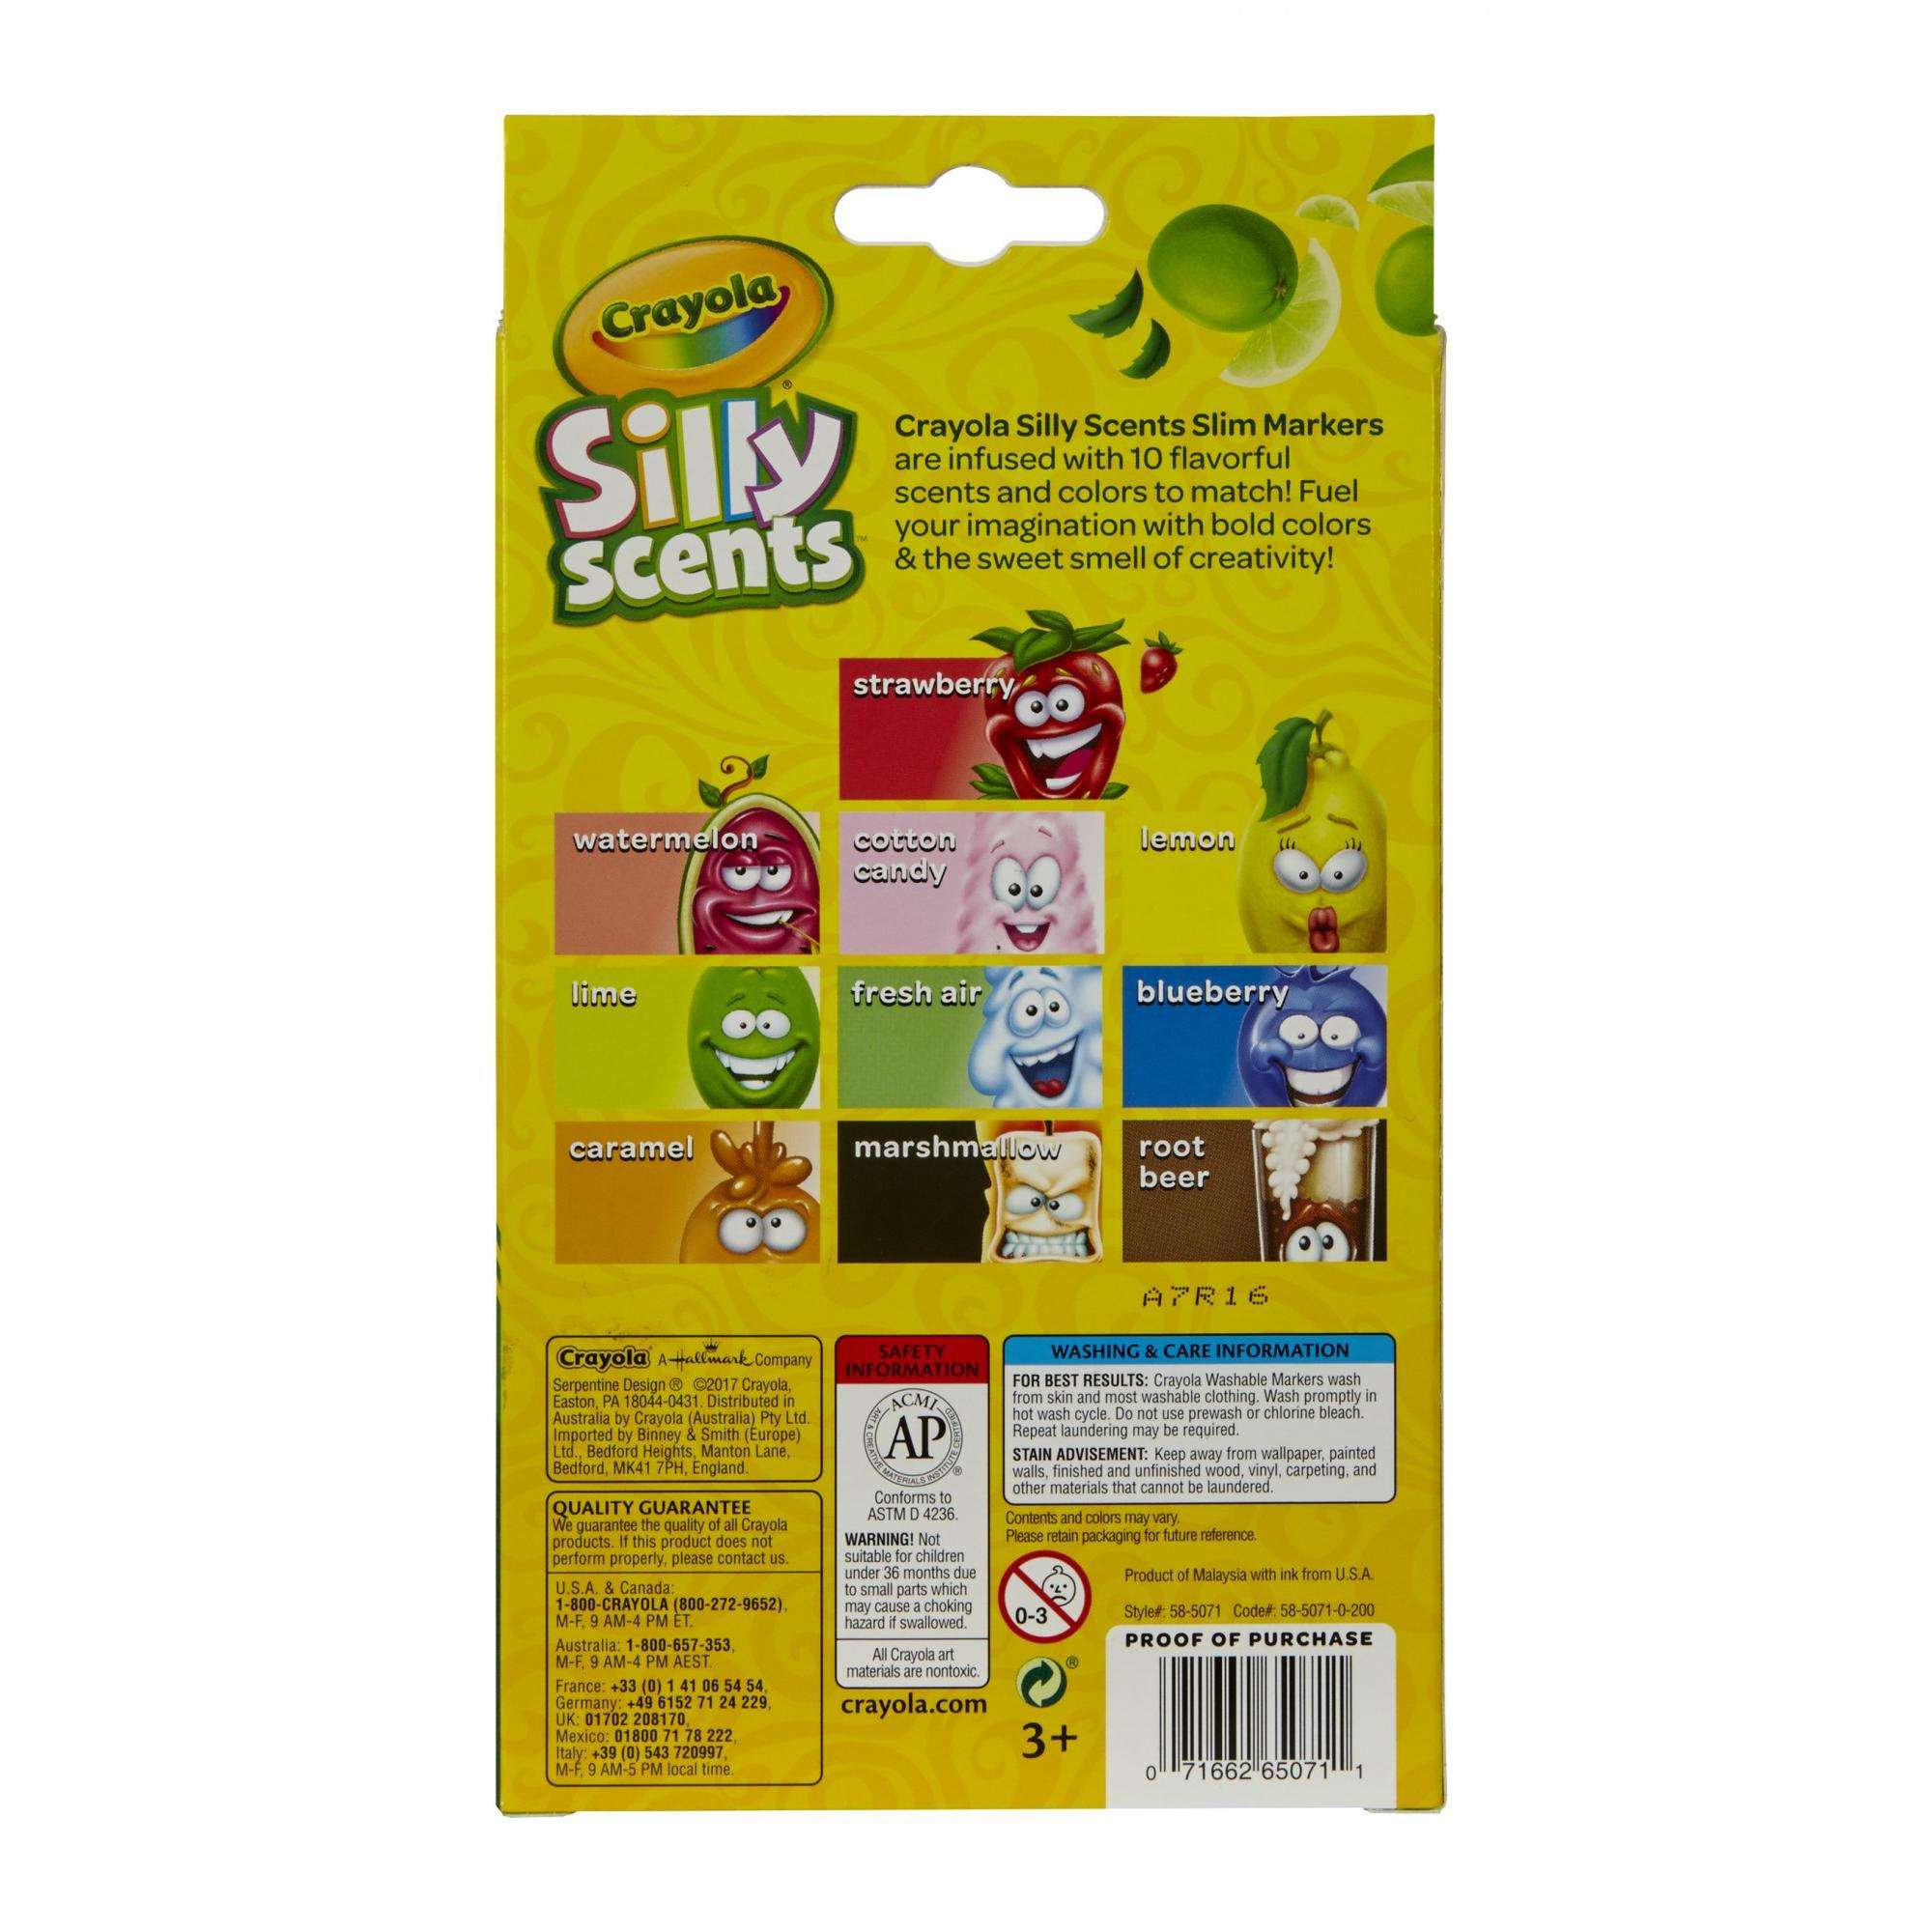 Crayola Silly Scents Slim Markers, Washable Scented Markers For Kids, 10 Pieces - image 3 of 8